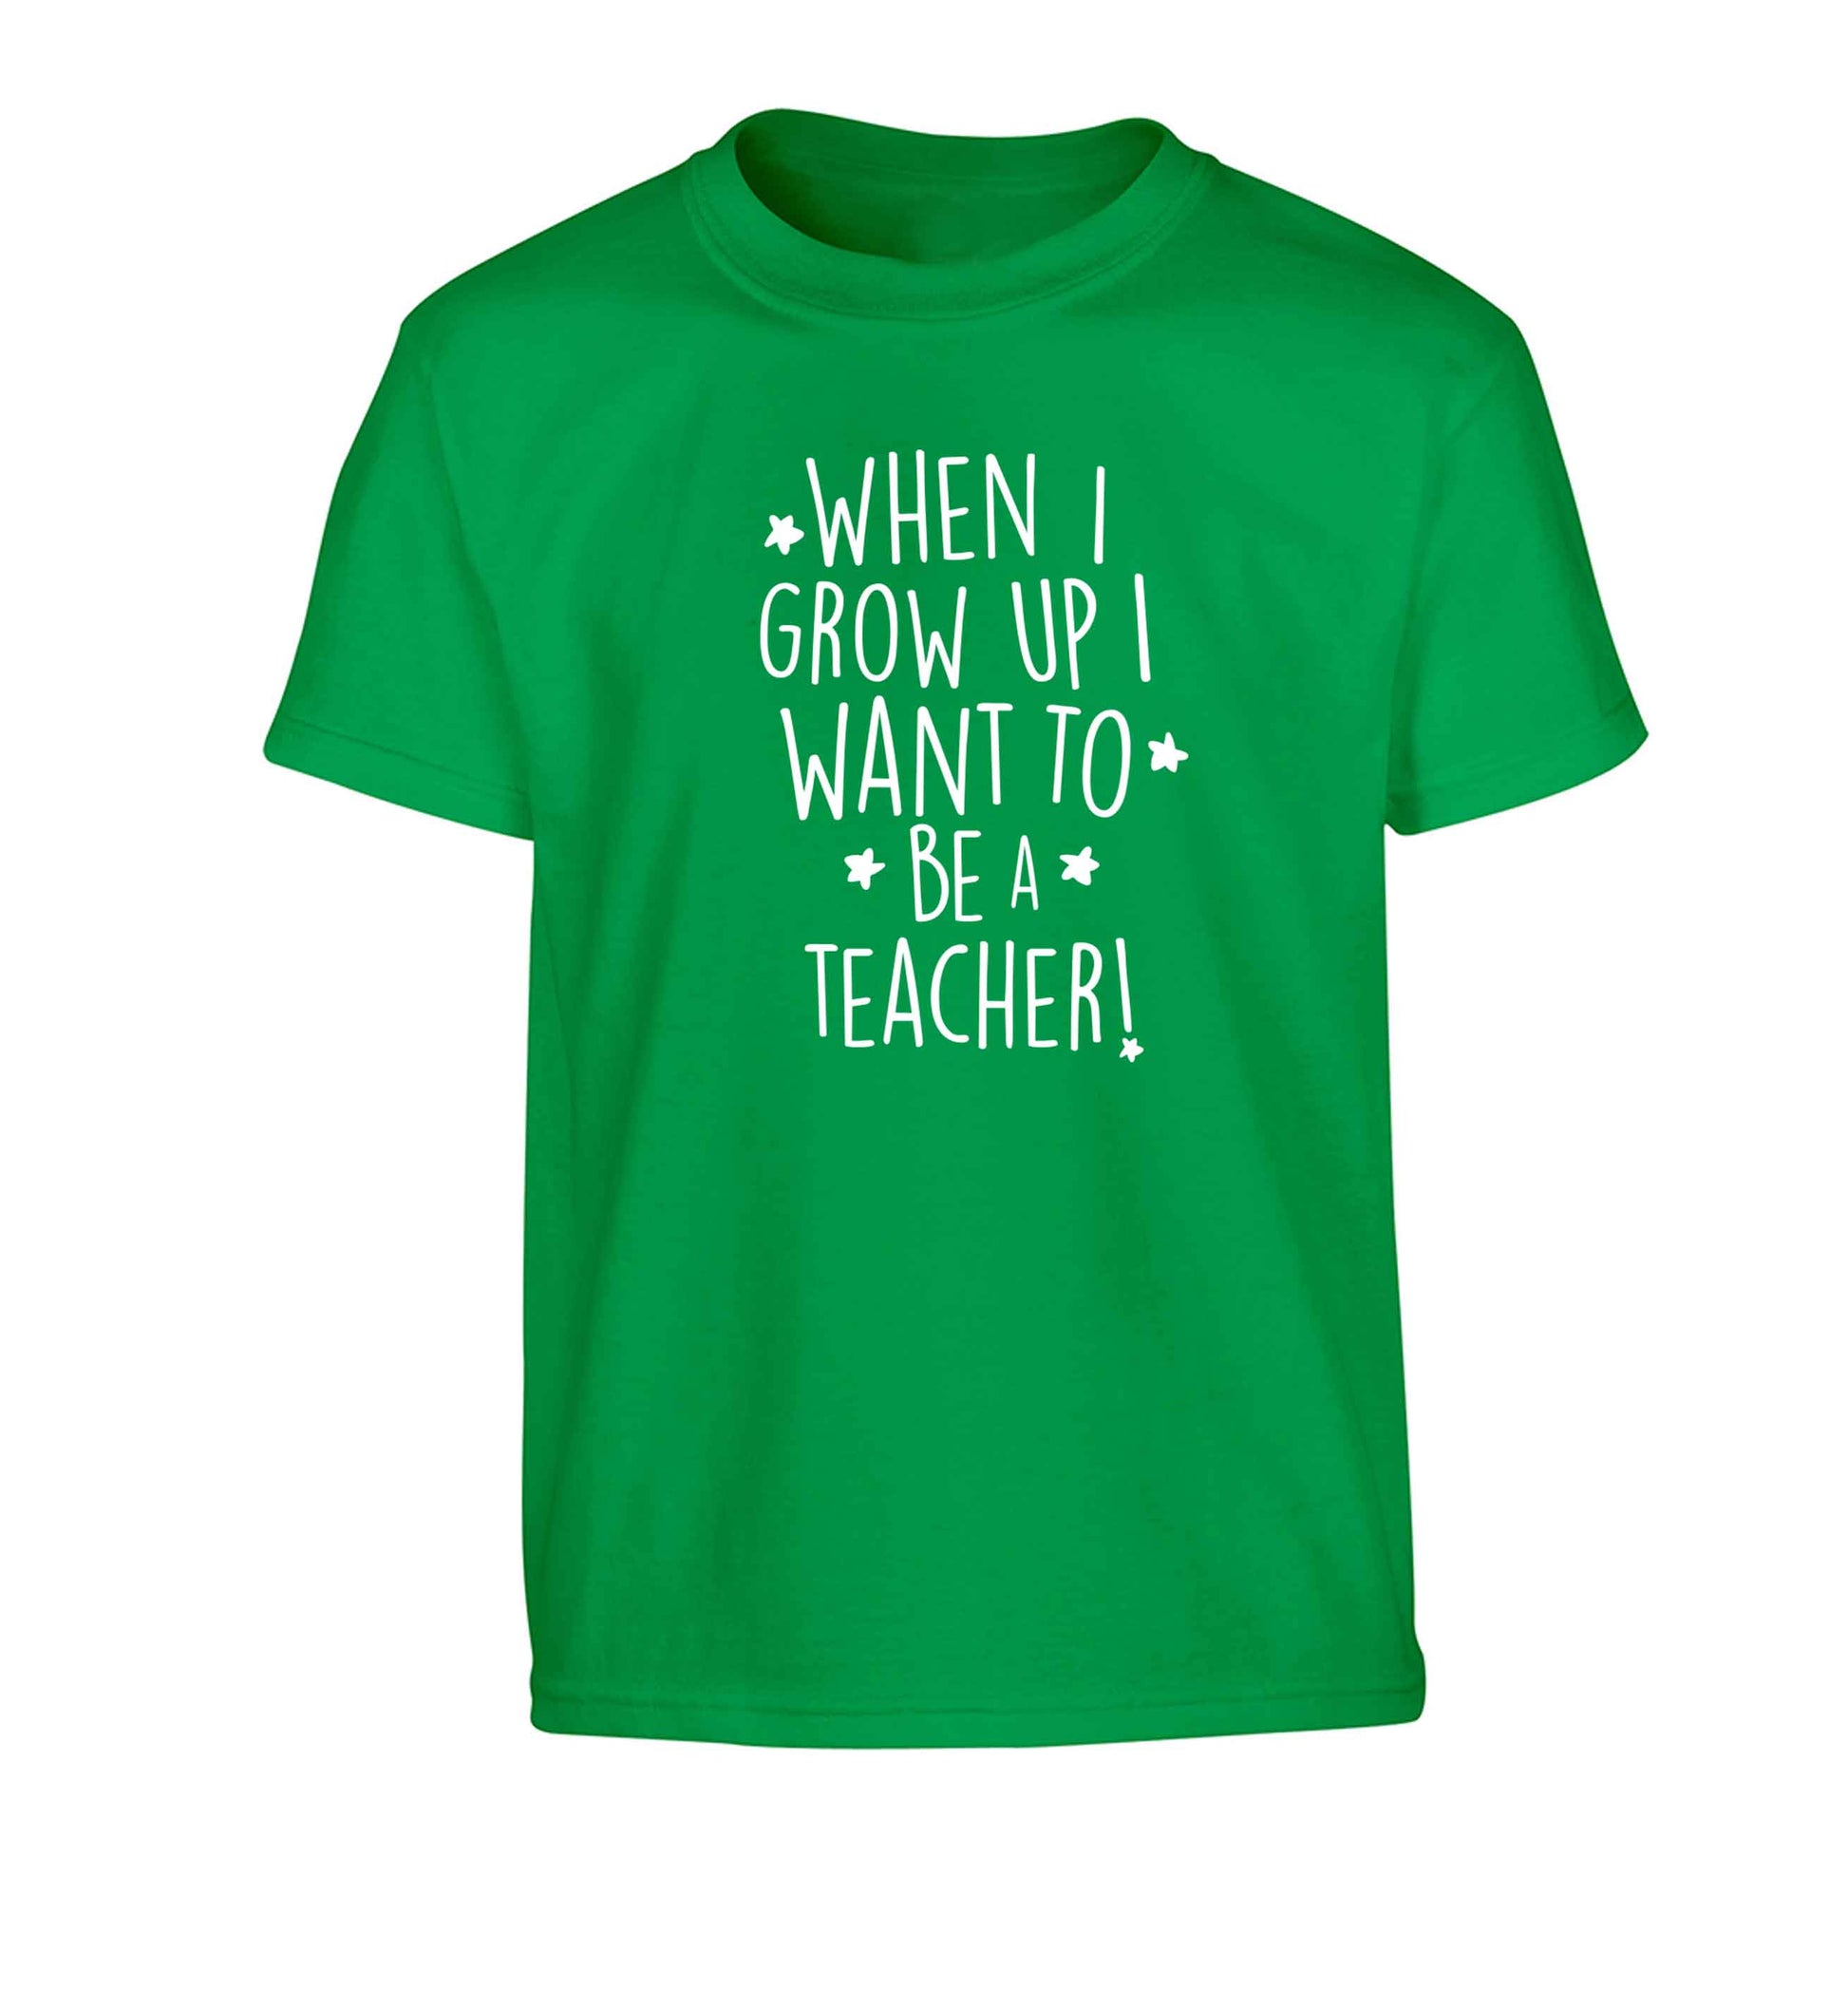 When I grow up I want to be a teacher Children's green Tshirt 12-13 Years